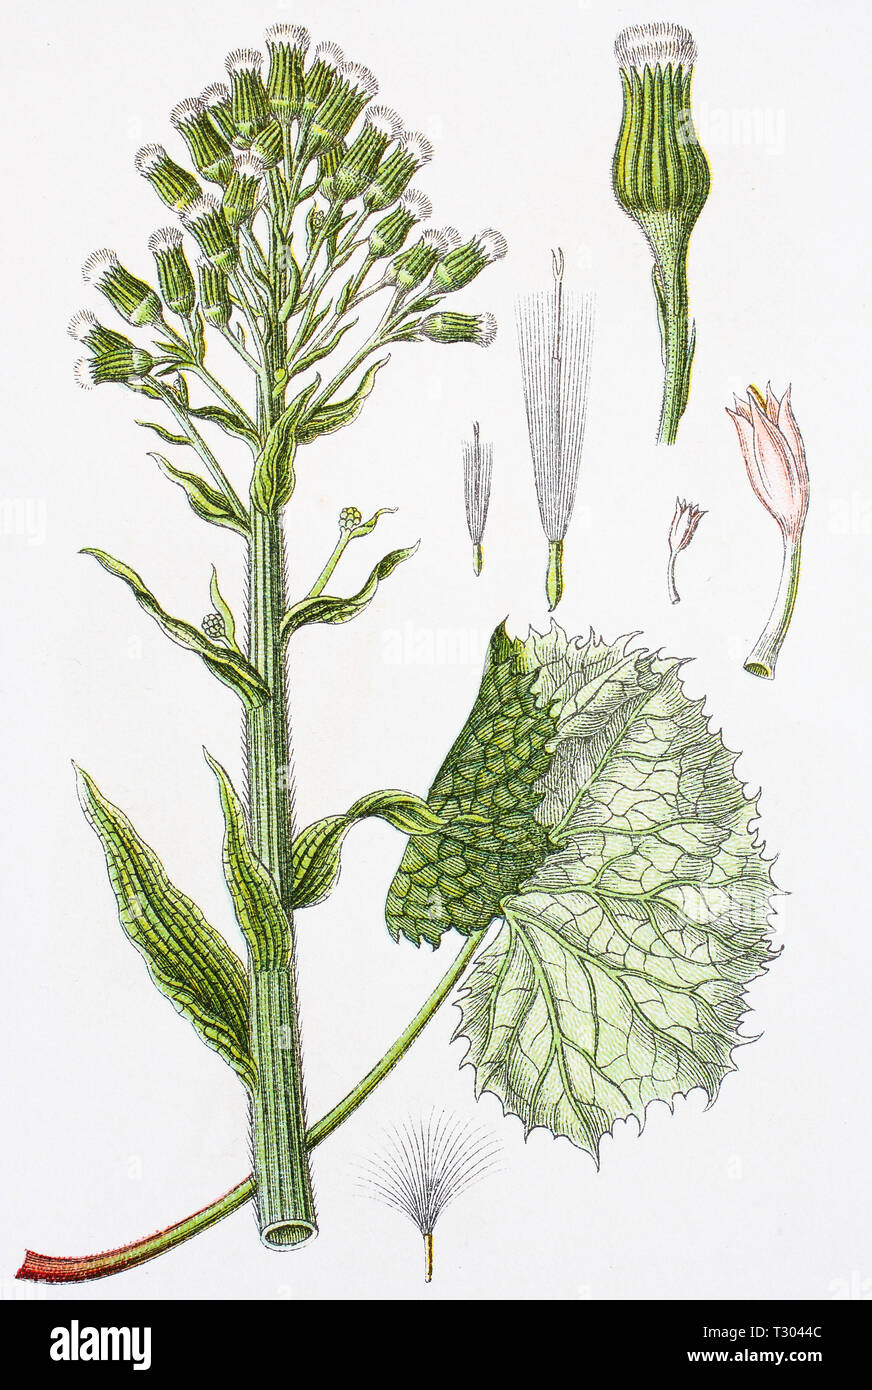 Digital improved reproduction of an illustration of, weiße Pestwurz, Petasites albus, white butterbur, from an original print of the 19th century Stock Photo